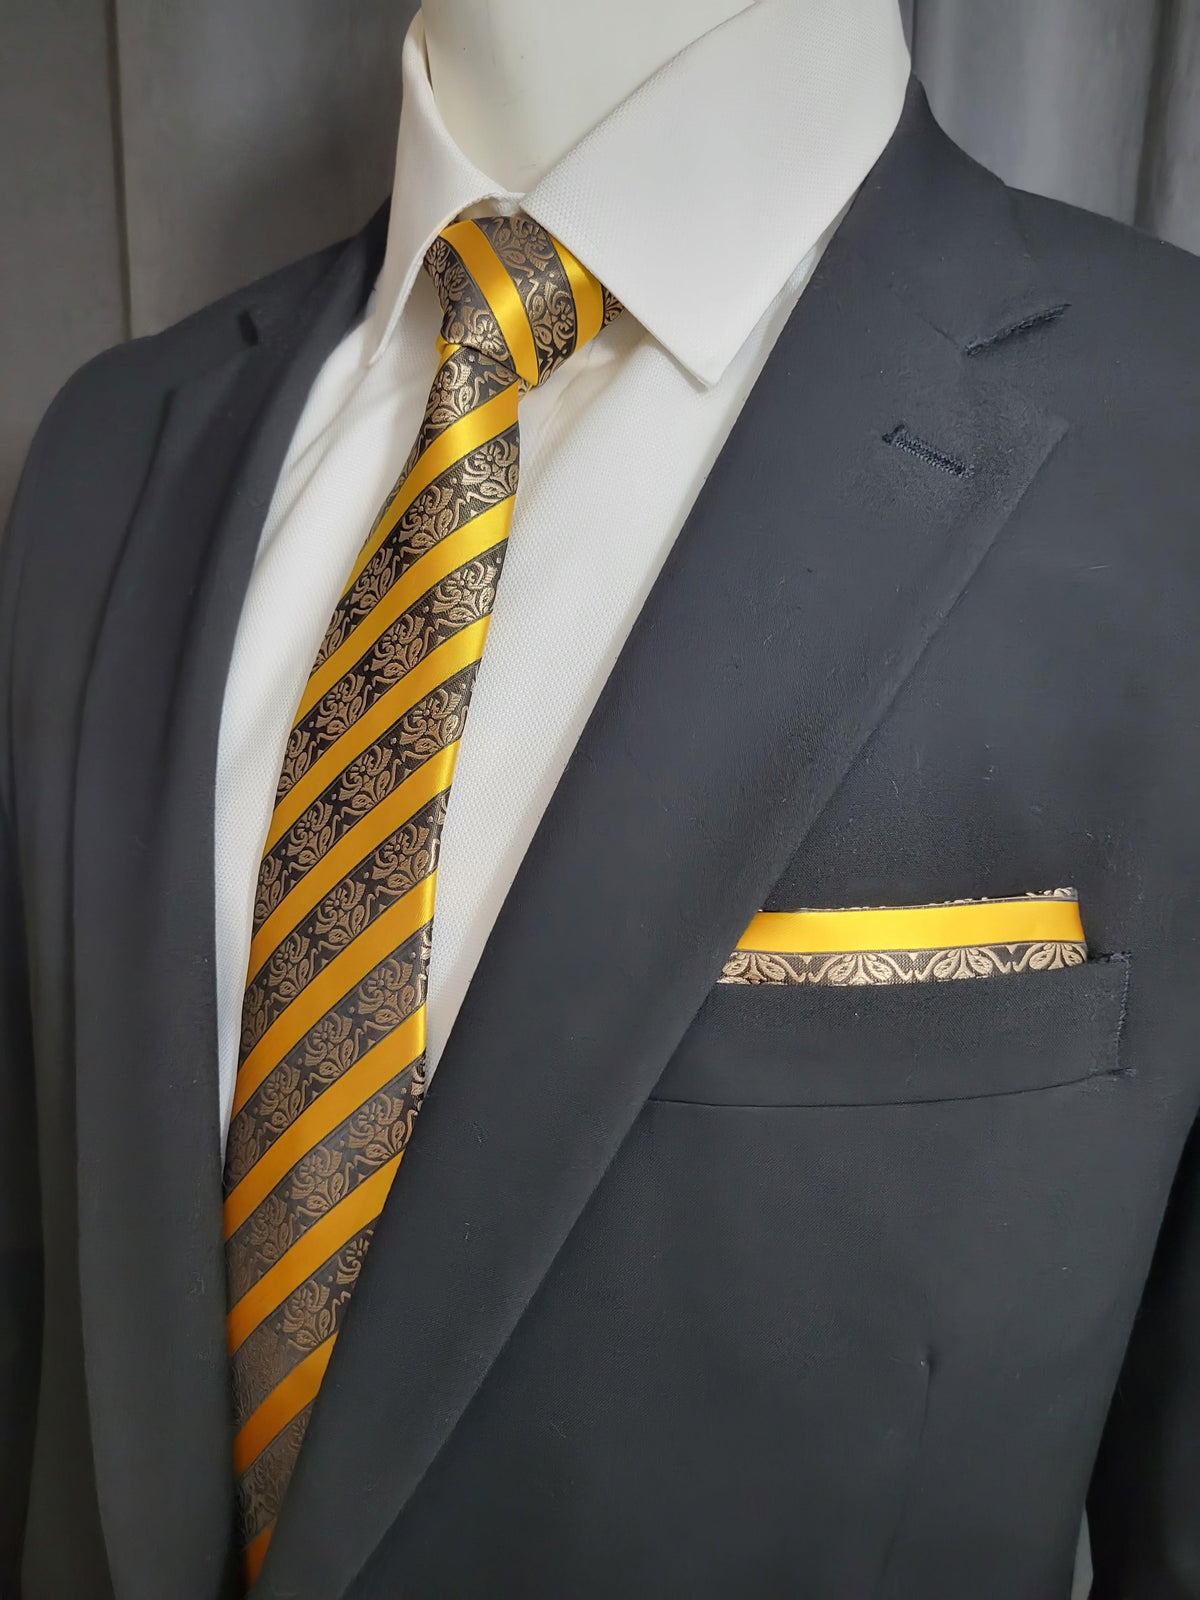 Black and Gold Diagonal Necktie and Pocket Square - The Upscale Banker